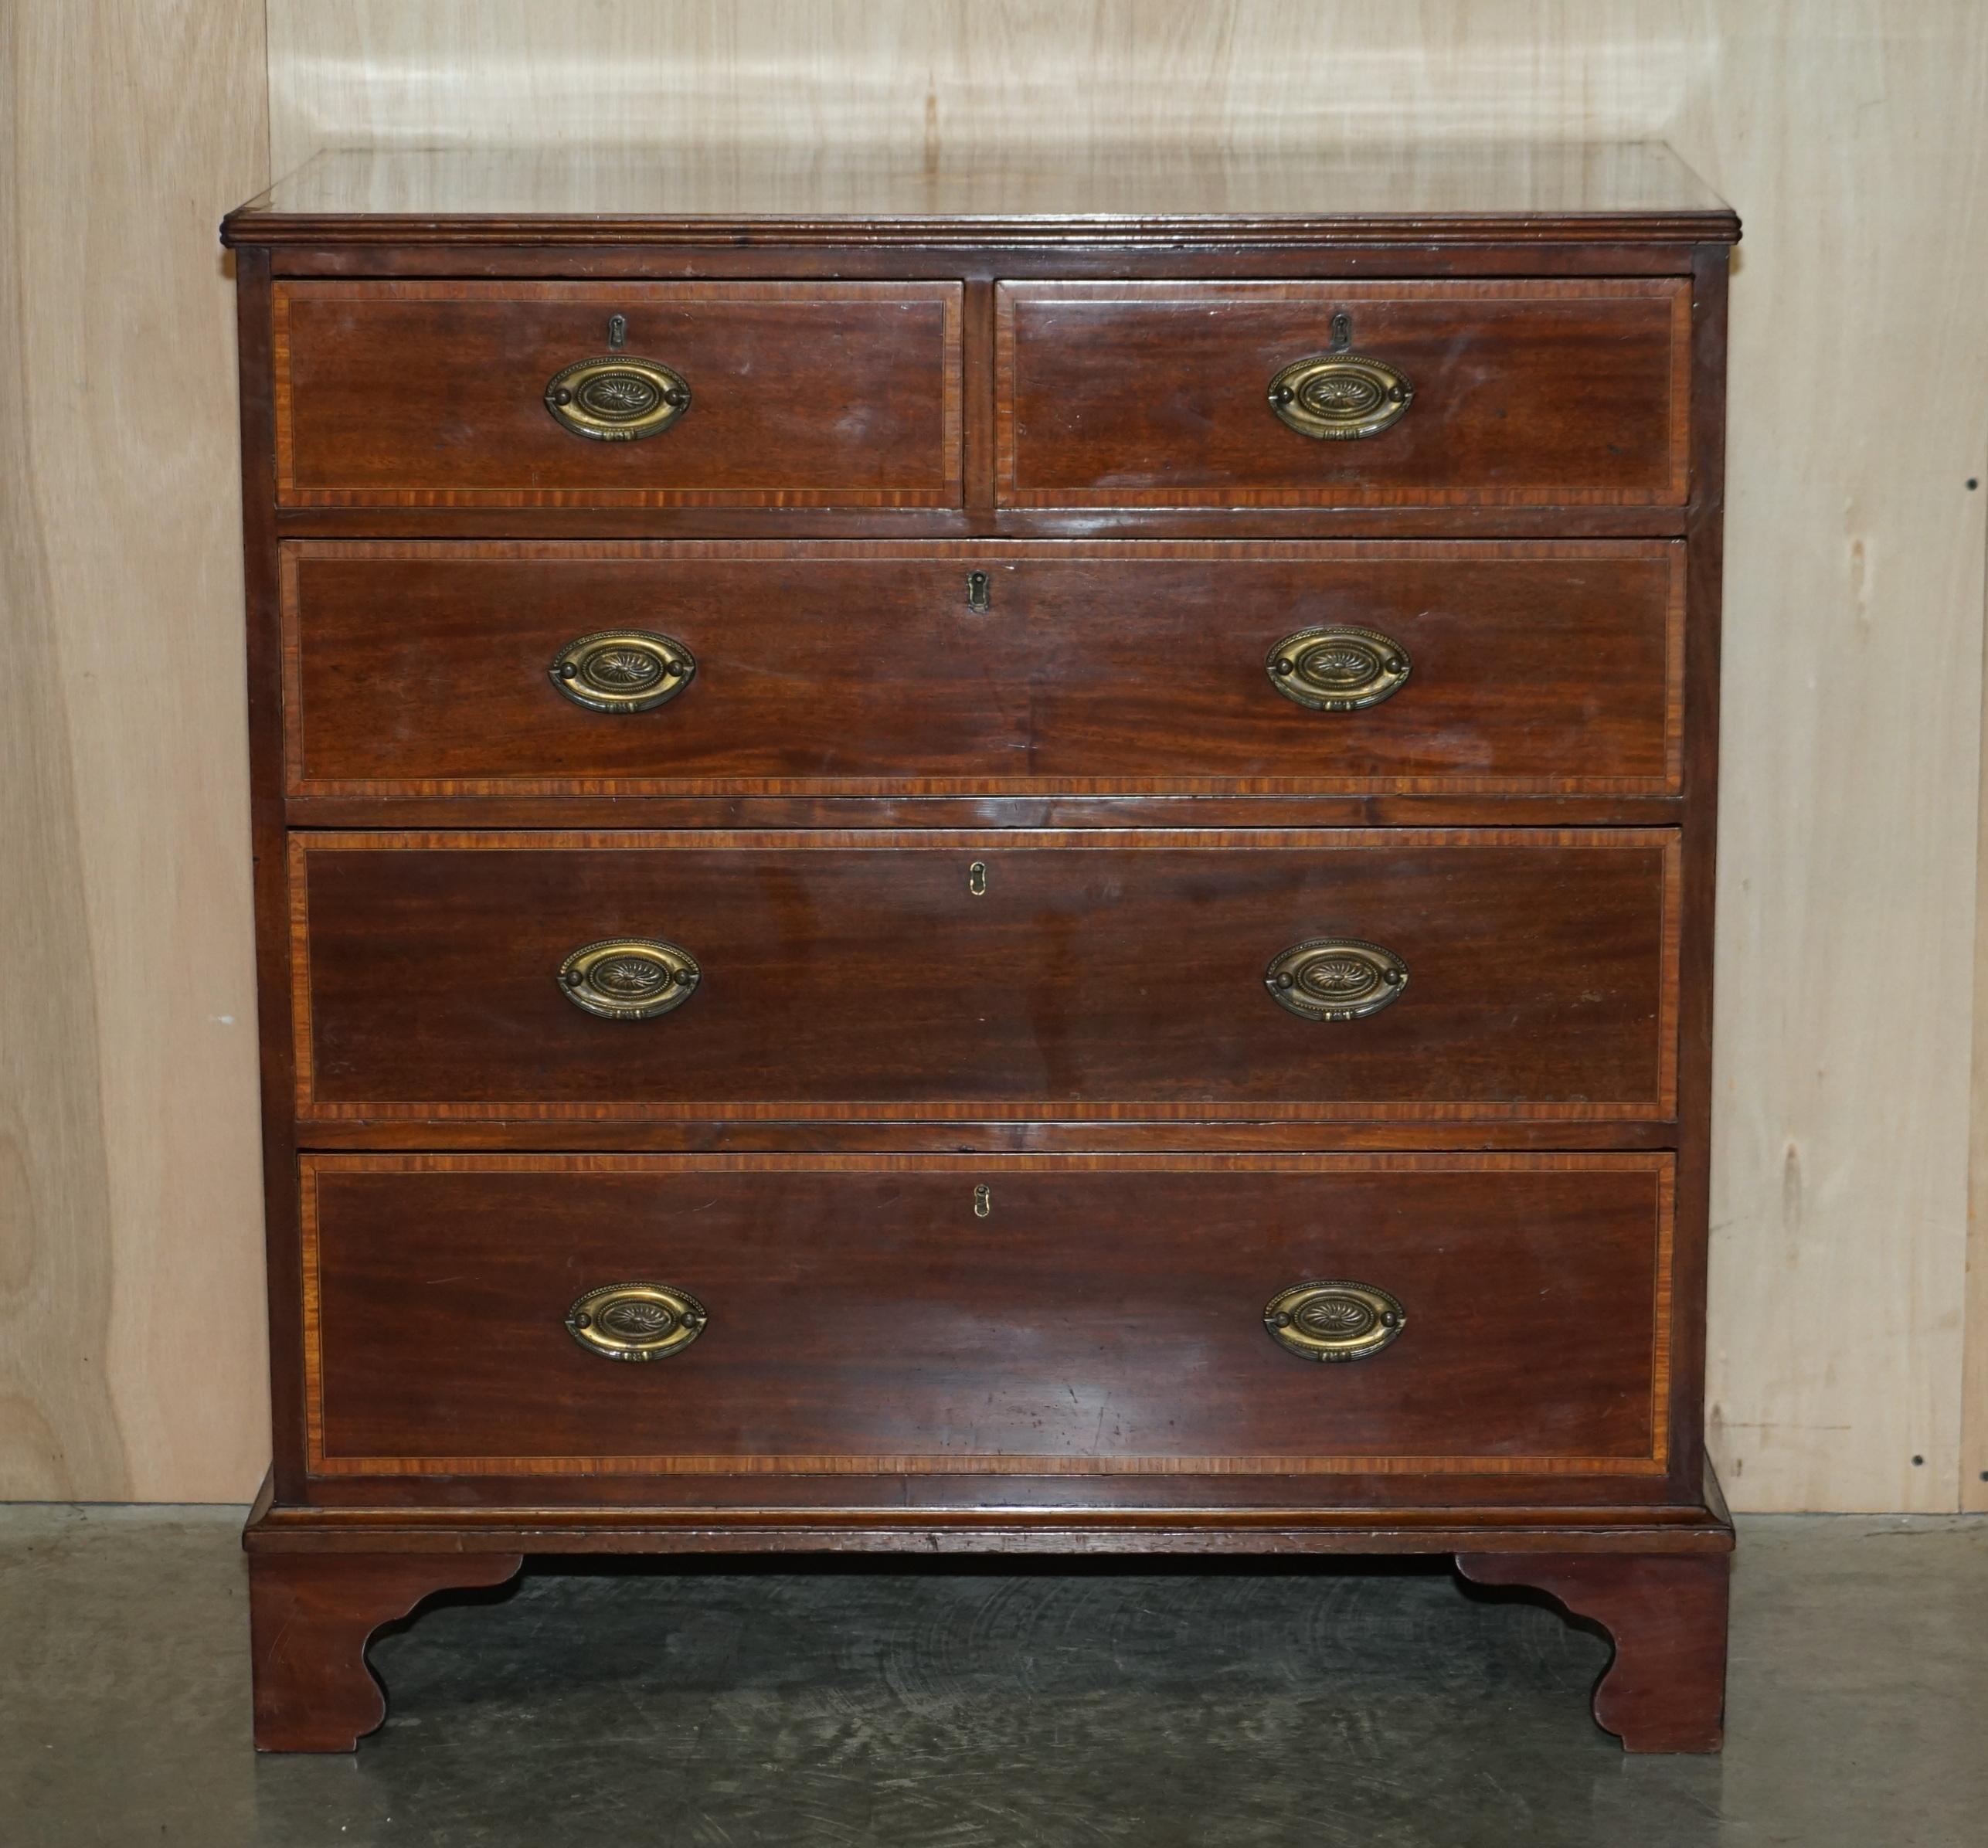 We are delighted to offer for sale this stunning, stamped, F.Thomas Halesowen, Sheraton Revival, Victorian mahogany and Satinwood Chest of Drawers

A very good looking well made and decorative chest, made in the two over three format, based on a